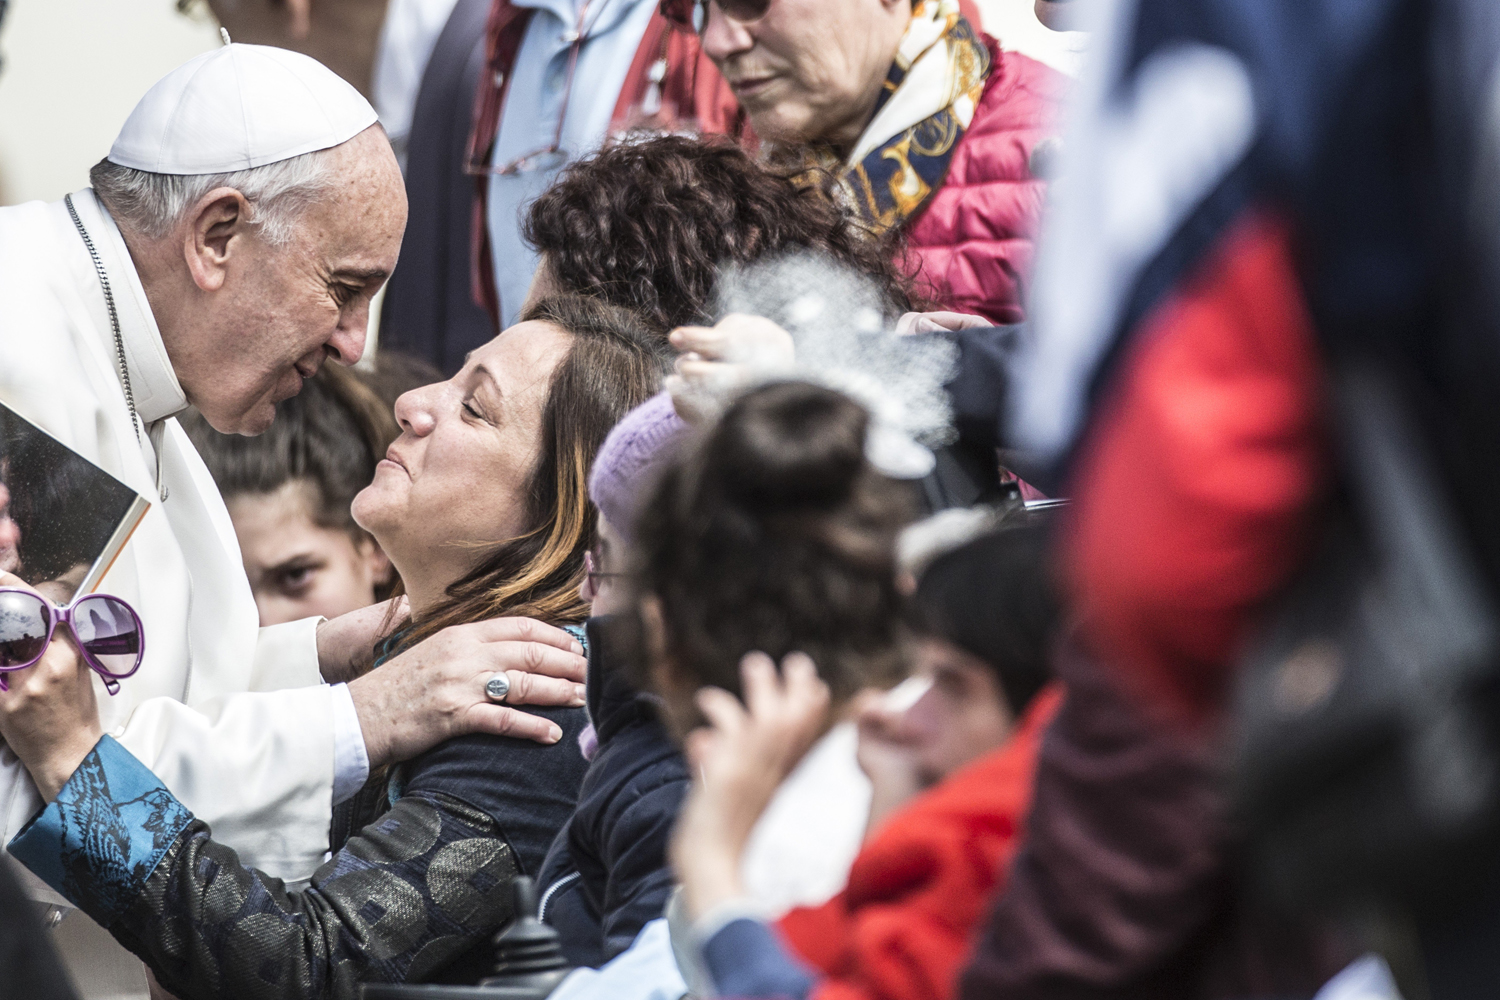 Pope Francis leads his general weekly audience in St. Peter's Square at the Vatican.